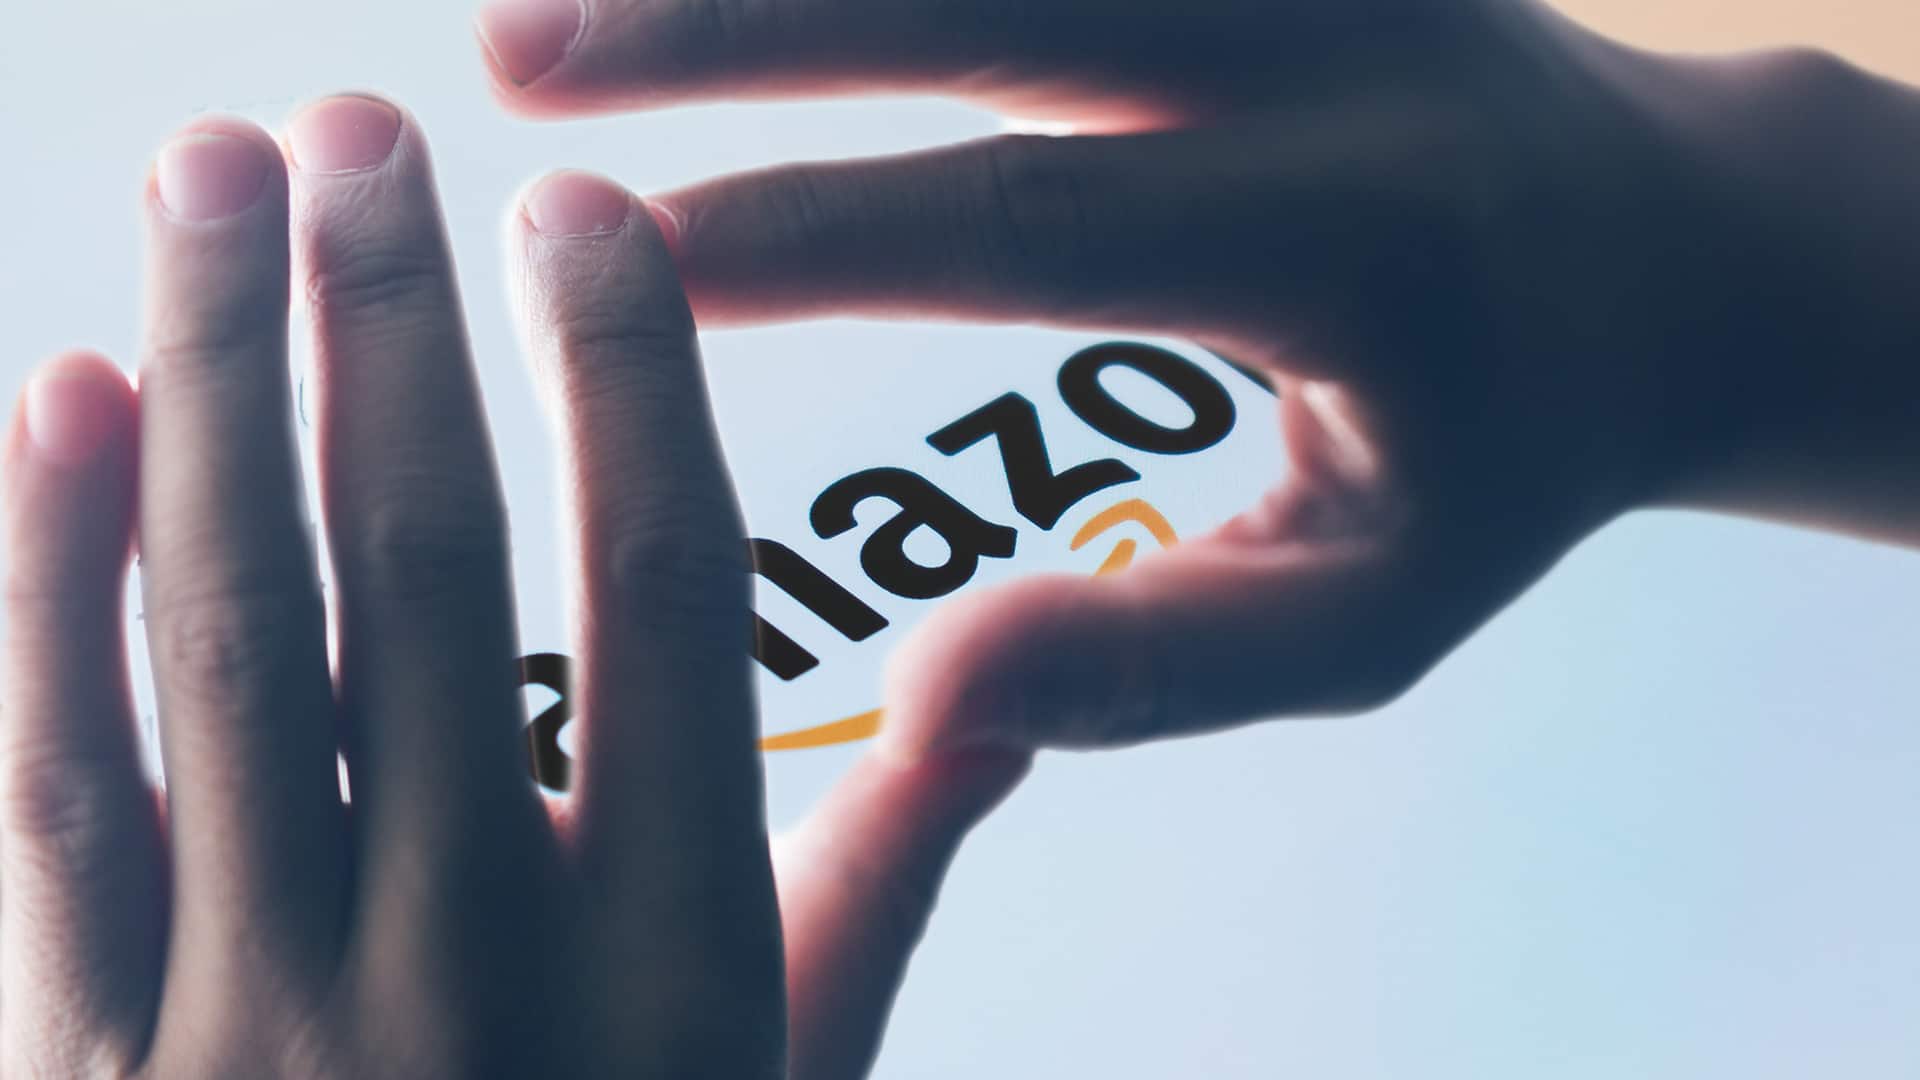 hiding amazon with hands